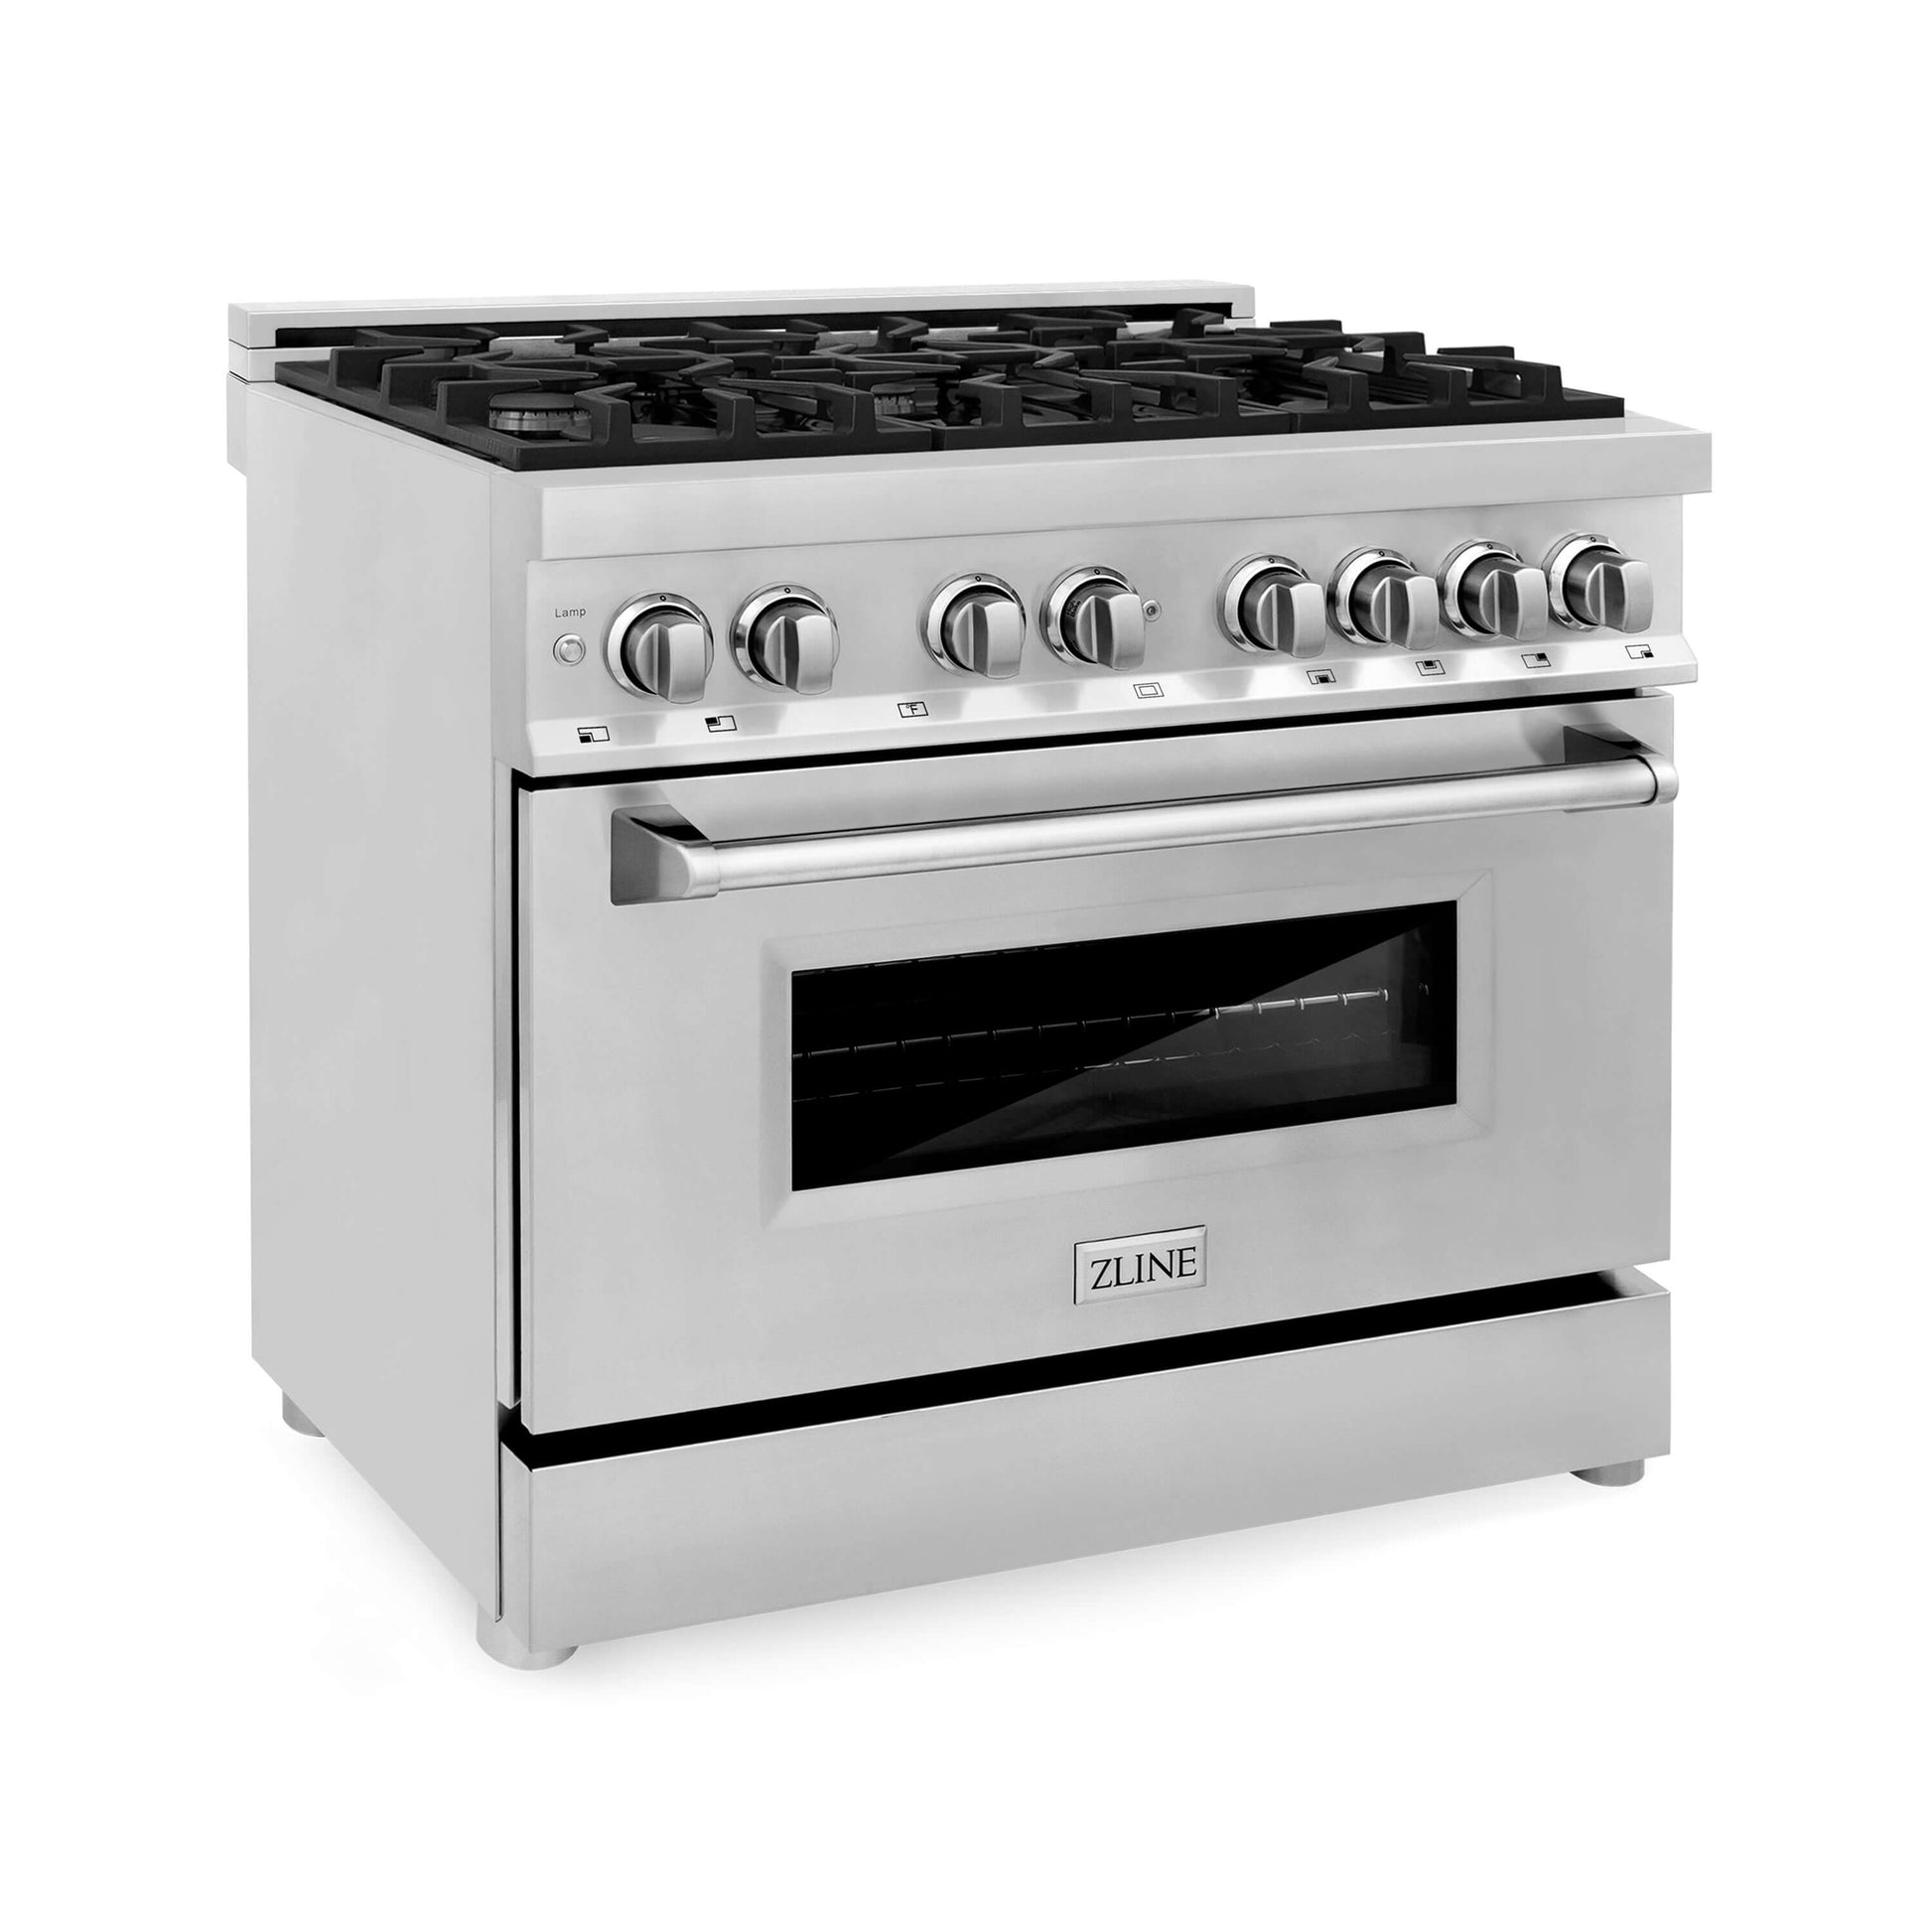 ZLINE 36 in. Dual Fuel Range with Gas Stove and Electric Oven in Stainless Steel (RA36) side, oven closed.